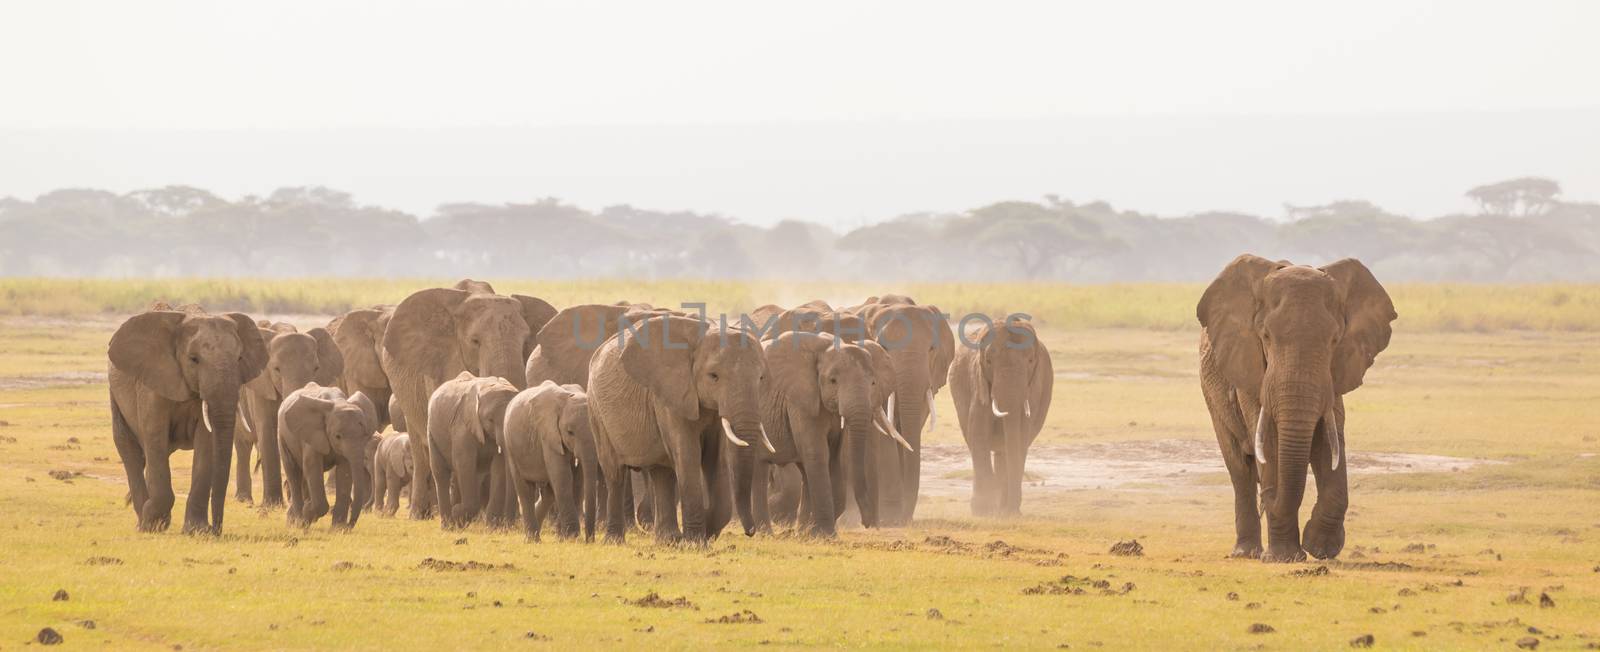 Herd of lephants at Amboseli National Park, formerly Maasai Amboseli Game Reserve, is in Kajiado District, Rift Valley Province in Kenya. The ecosystem that spreads across the Kenya-Tanzania border.